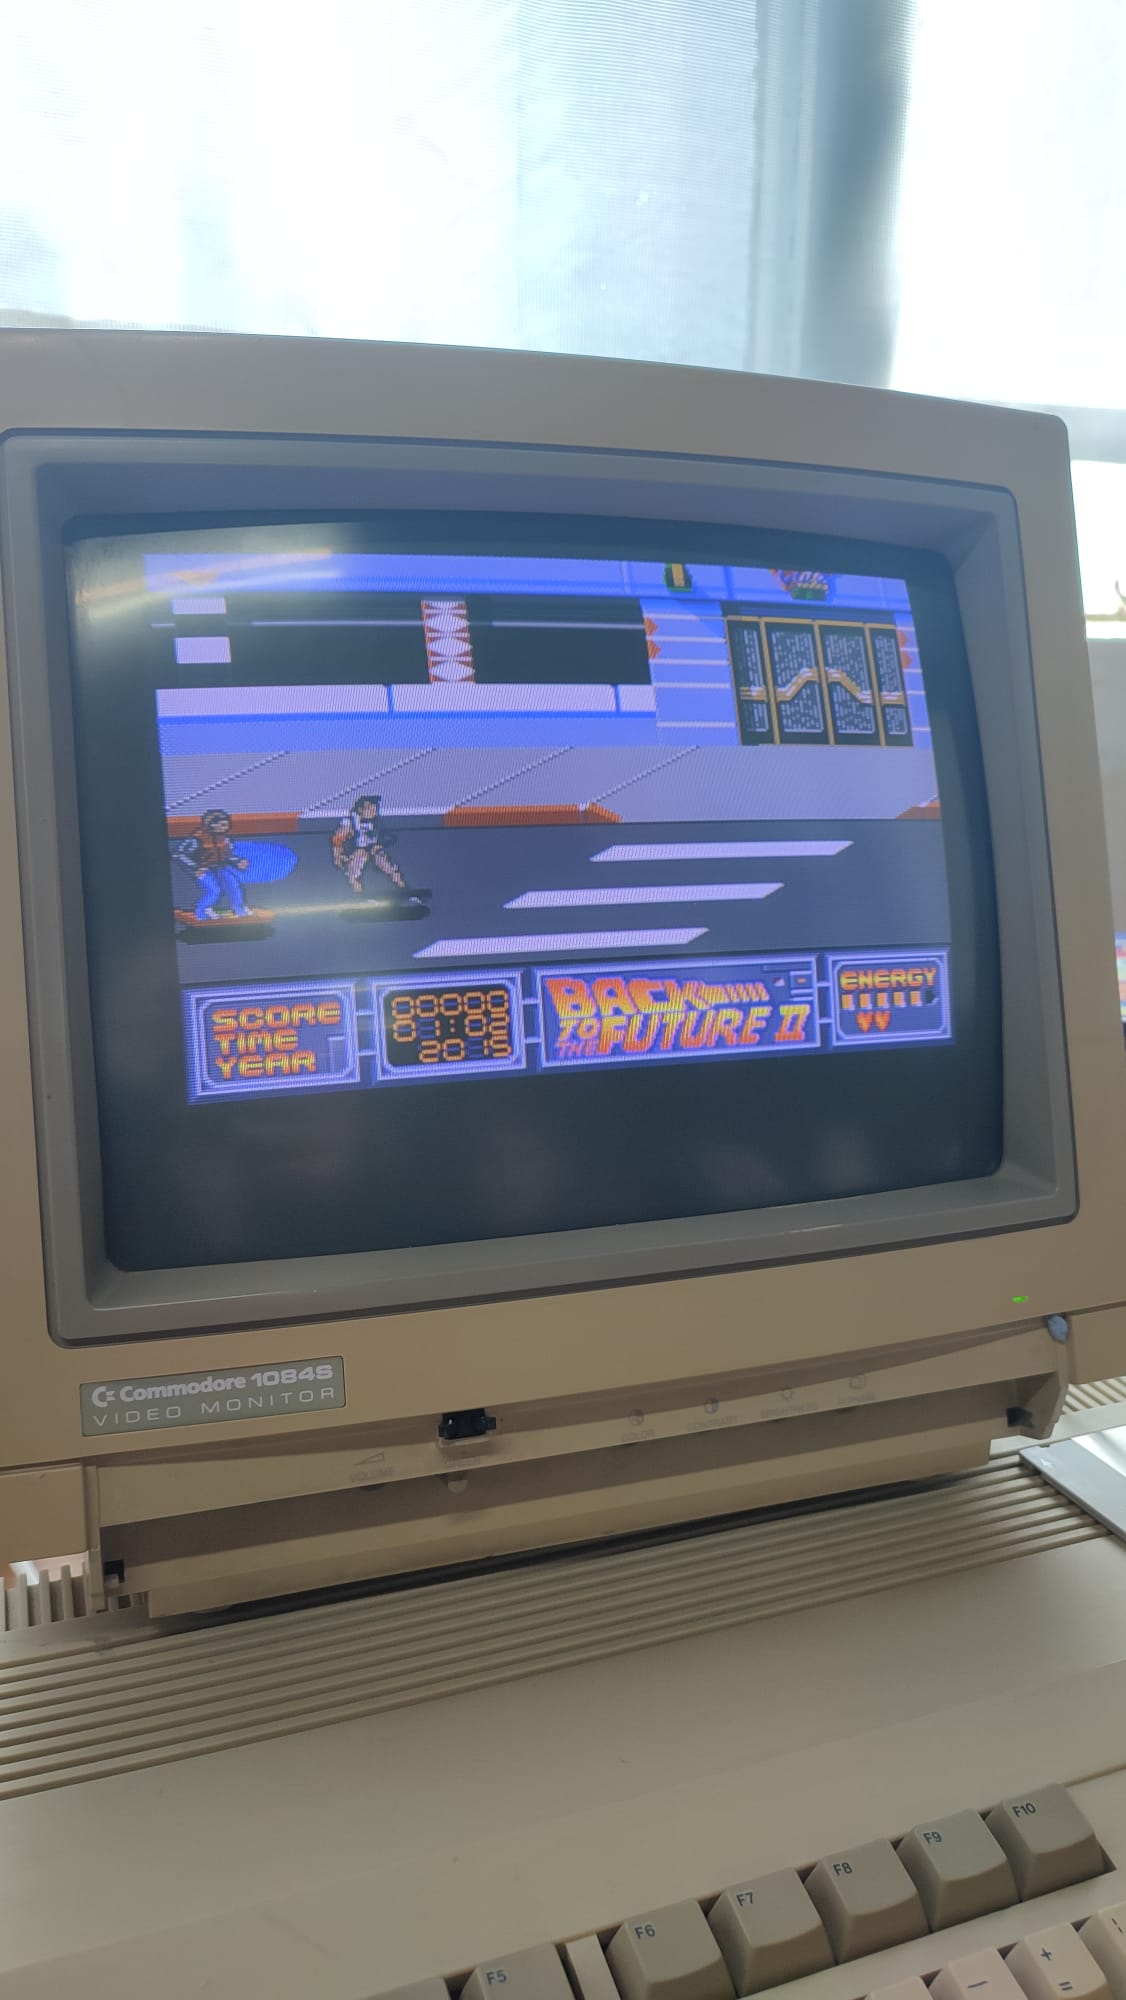 A CRT monitor with Back To The Future 2 on the screen